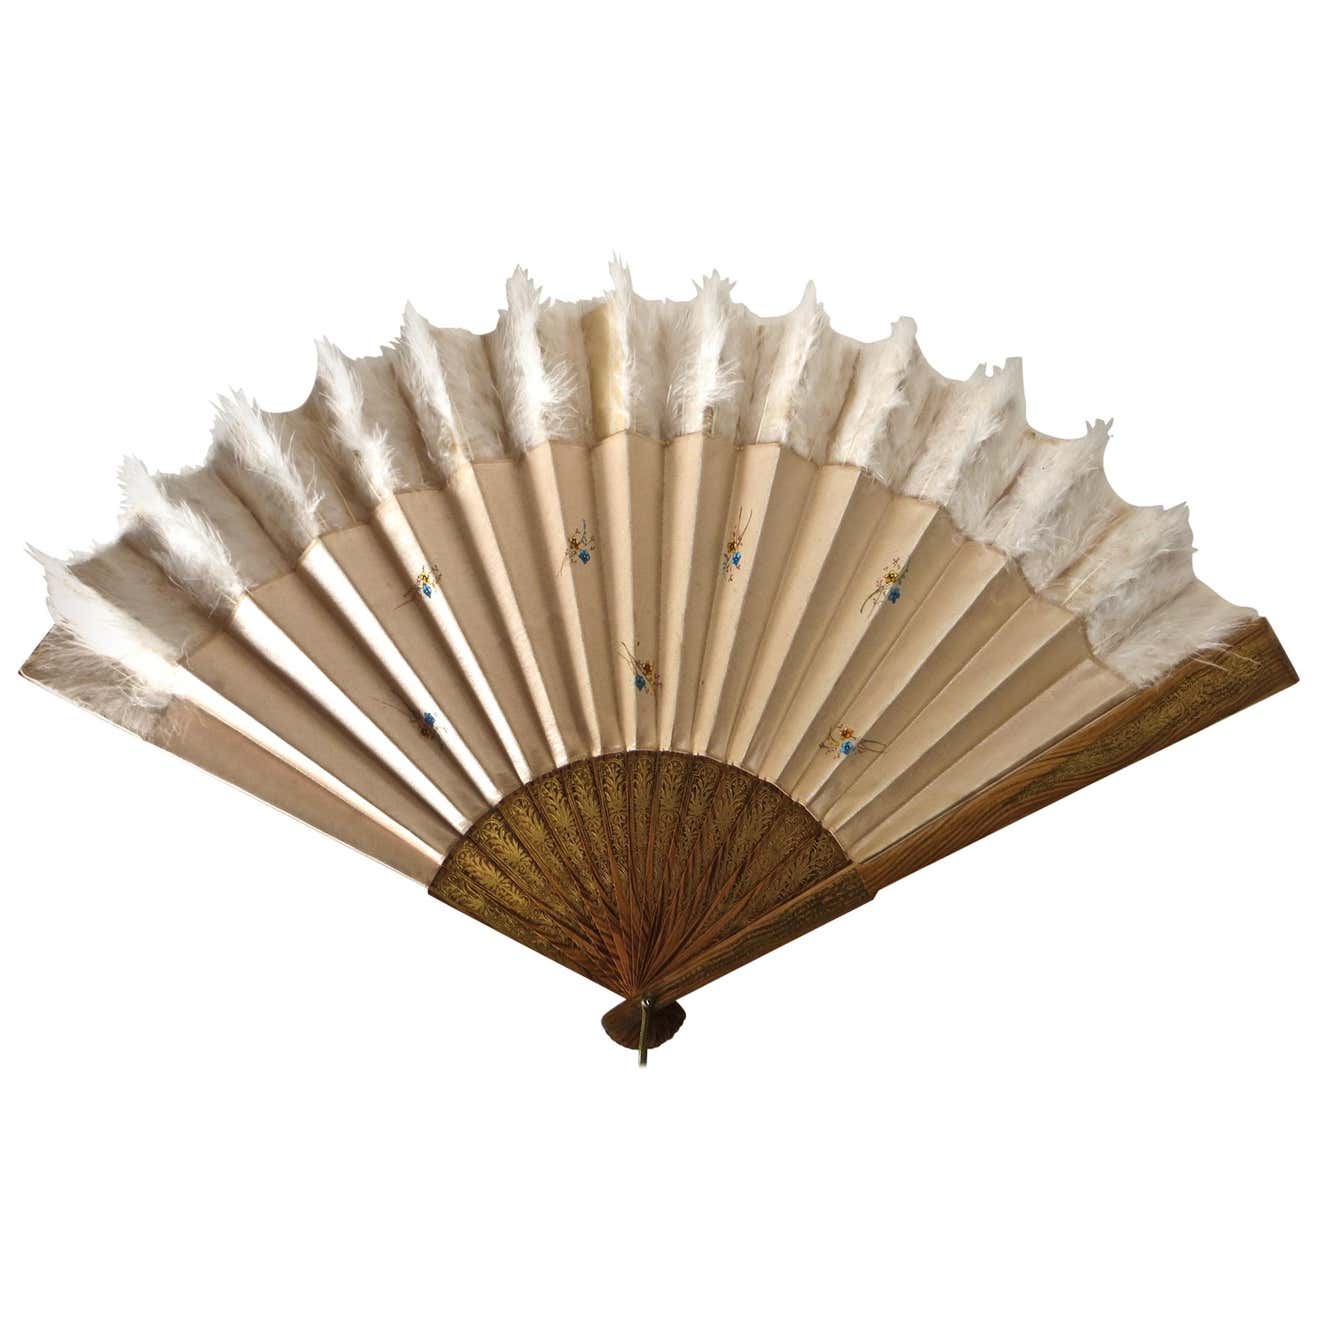 IdeaStage Promotional Products Folding Handheld Paper Fans